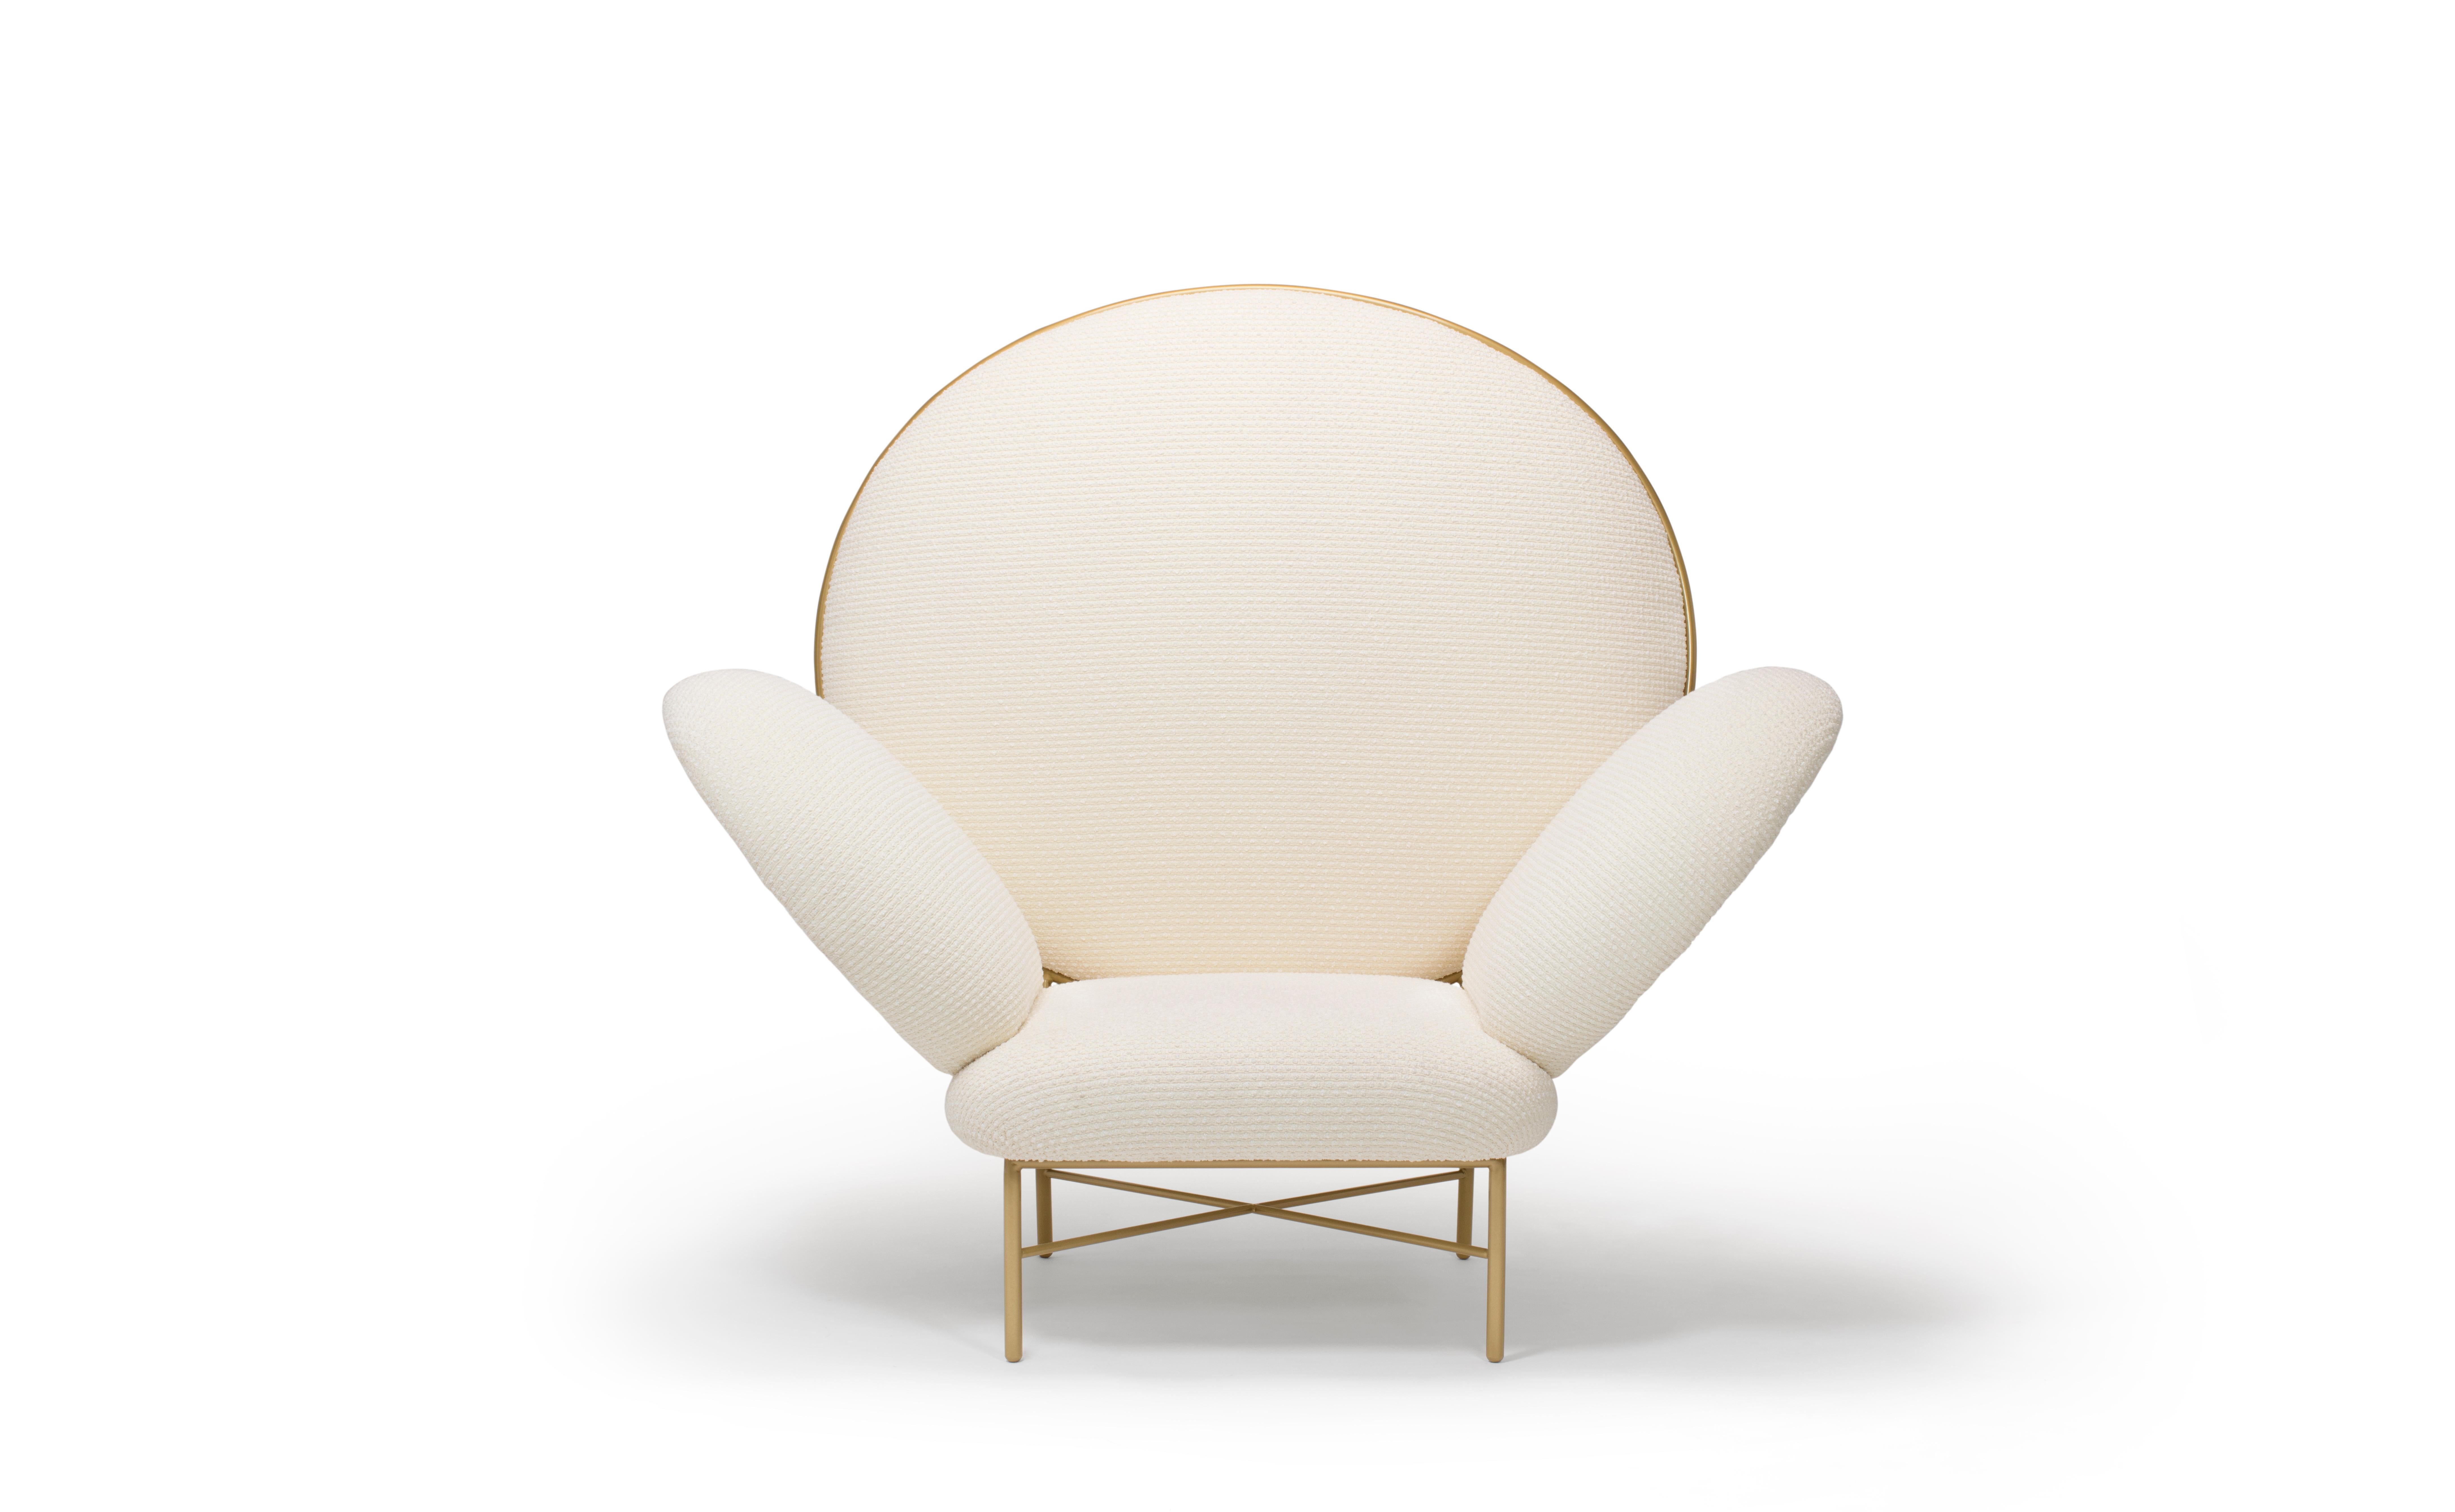 Modern Contemporary Ivory Upholstered Armchair, Stay Armchair by Nika Zupanc for Se